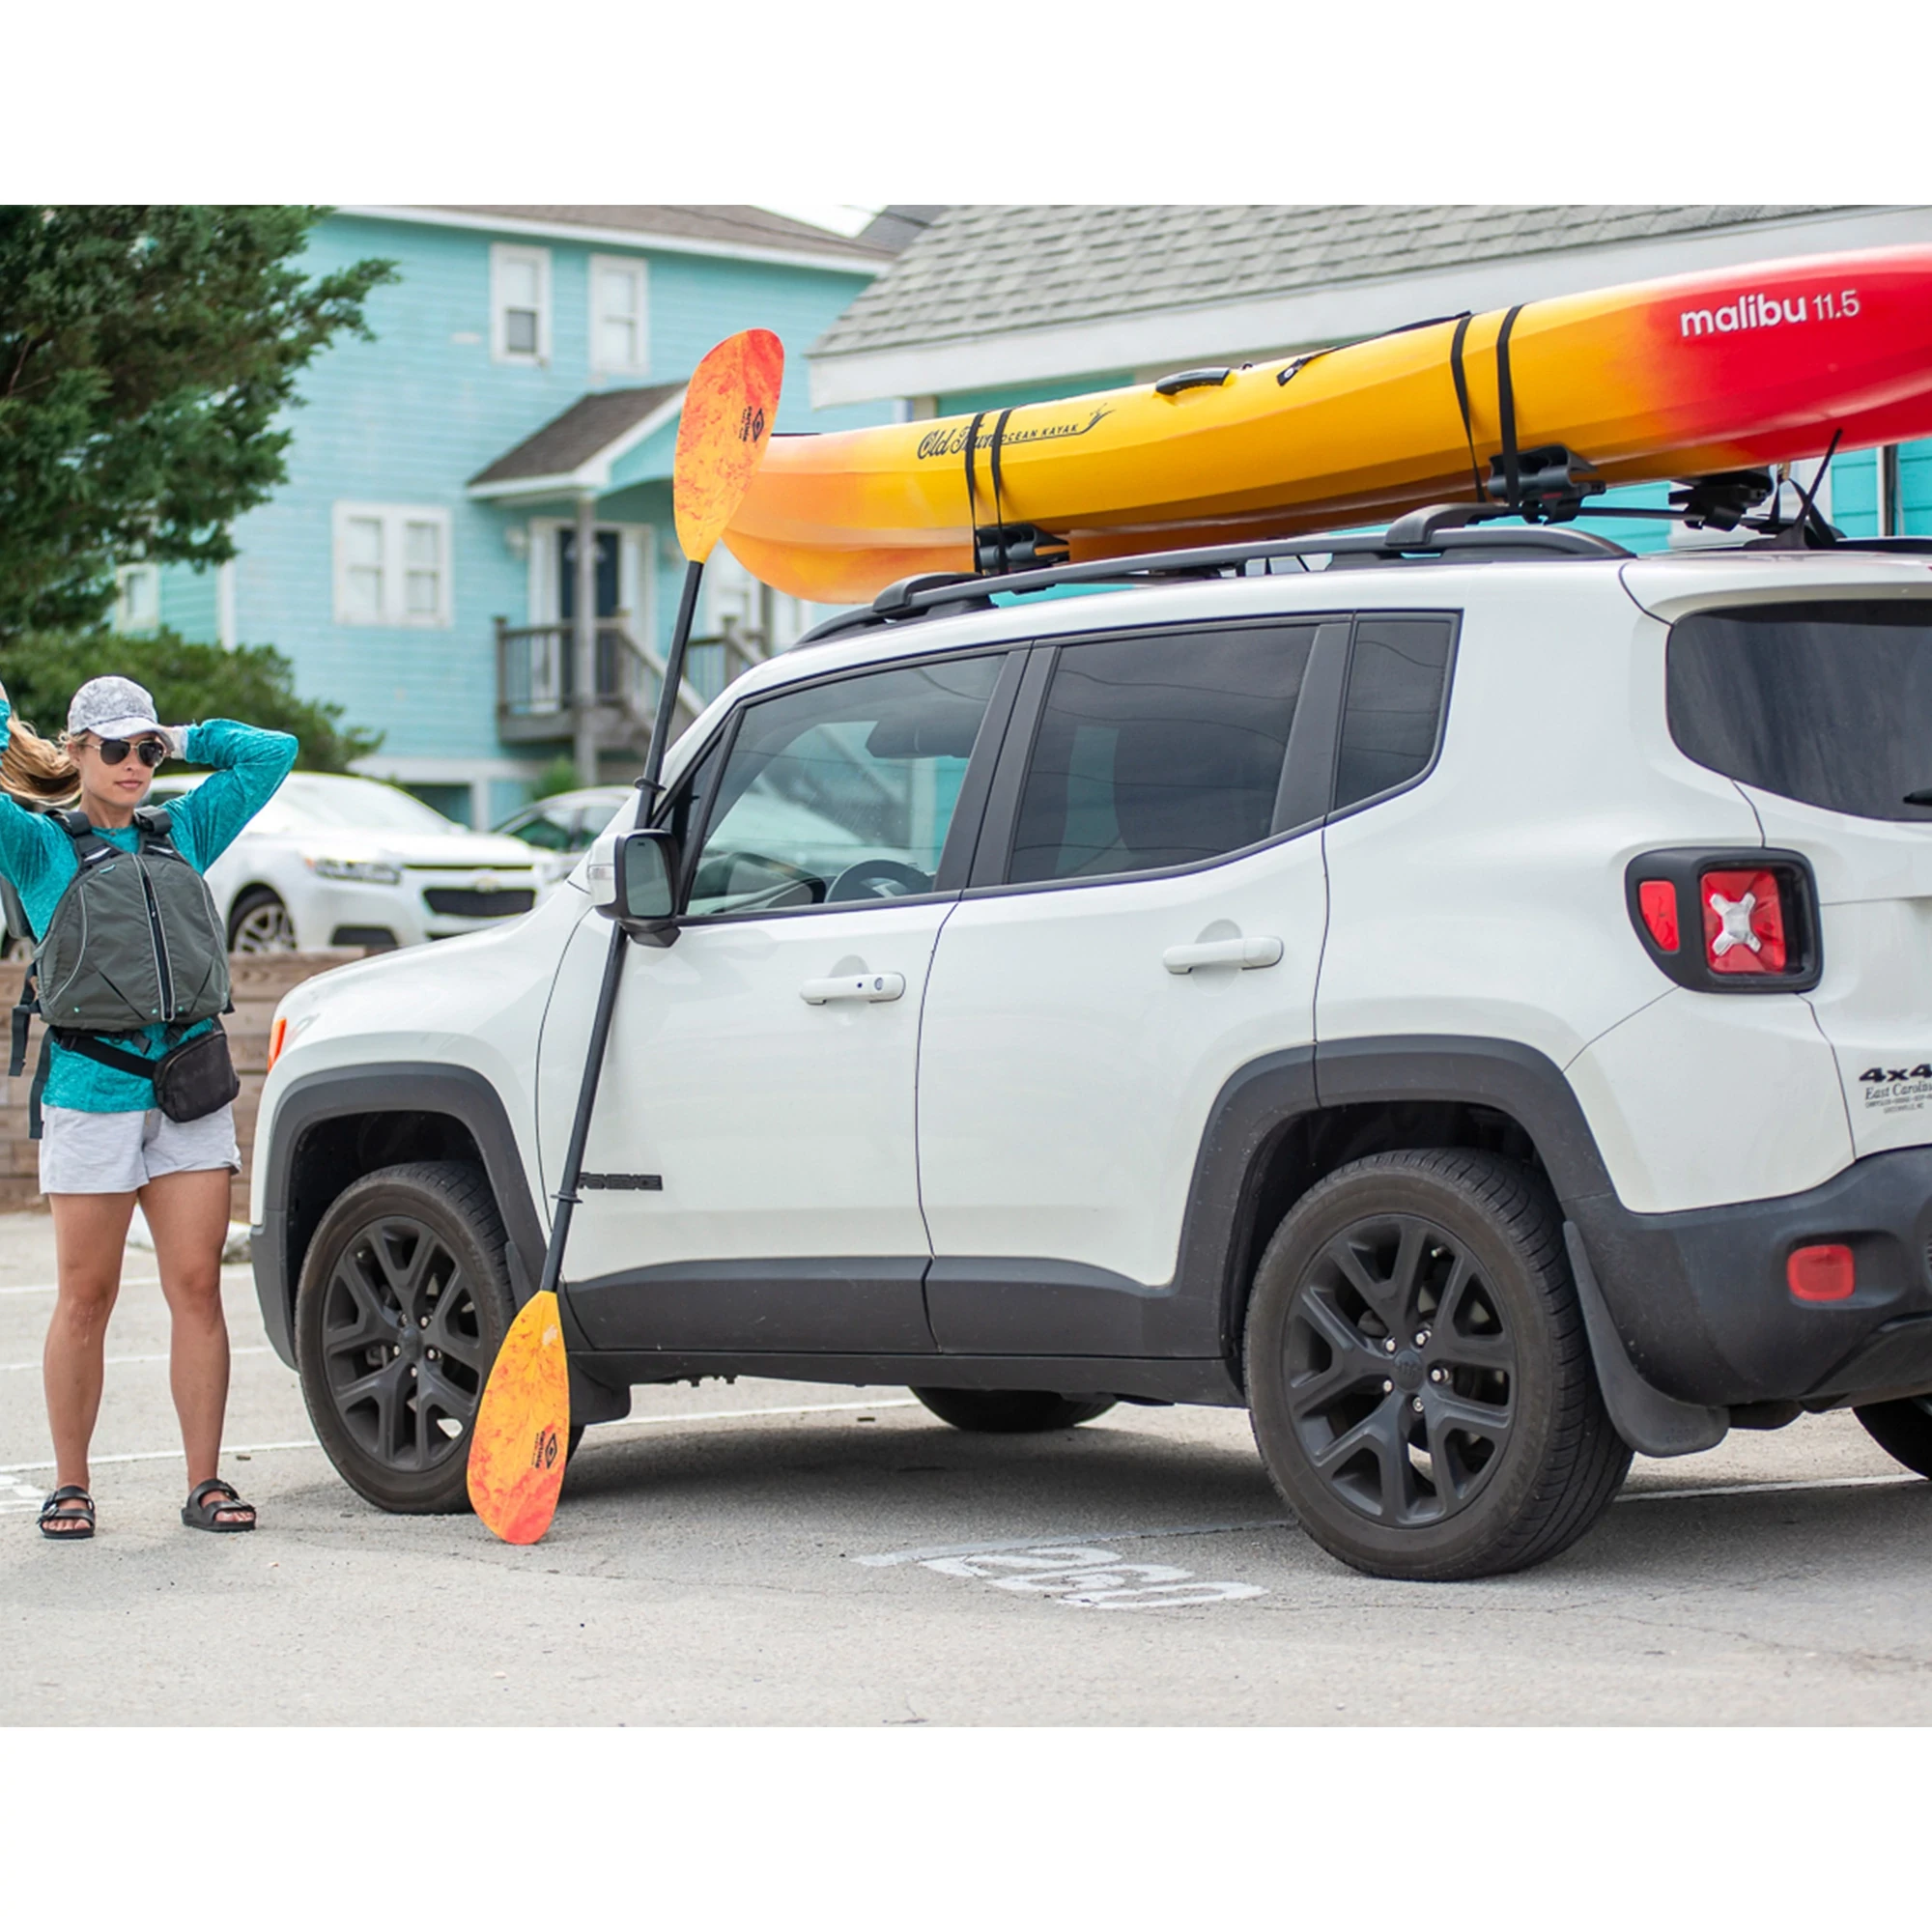 Woman standing next to truck loaded with the Old Town Ocean Kayak Malibu 11.5 kayak